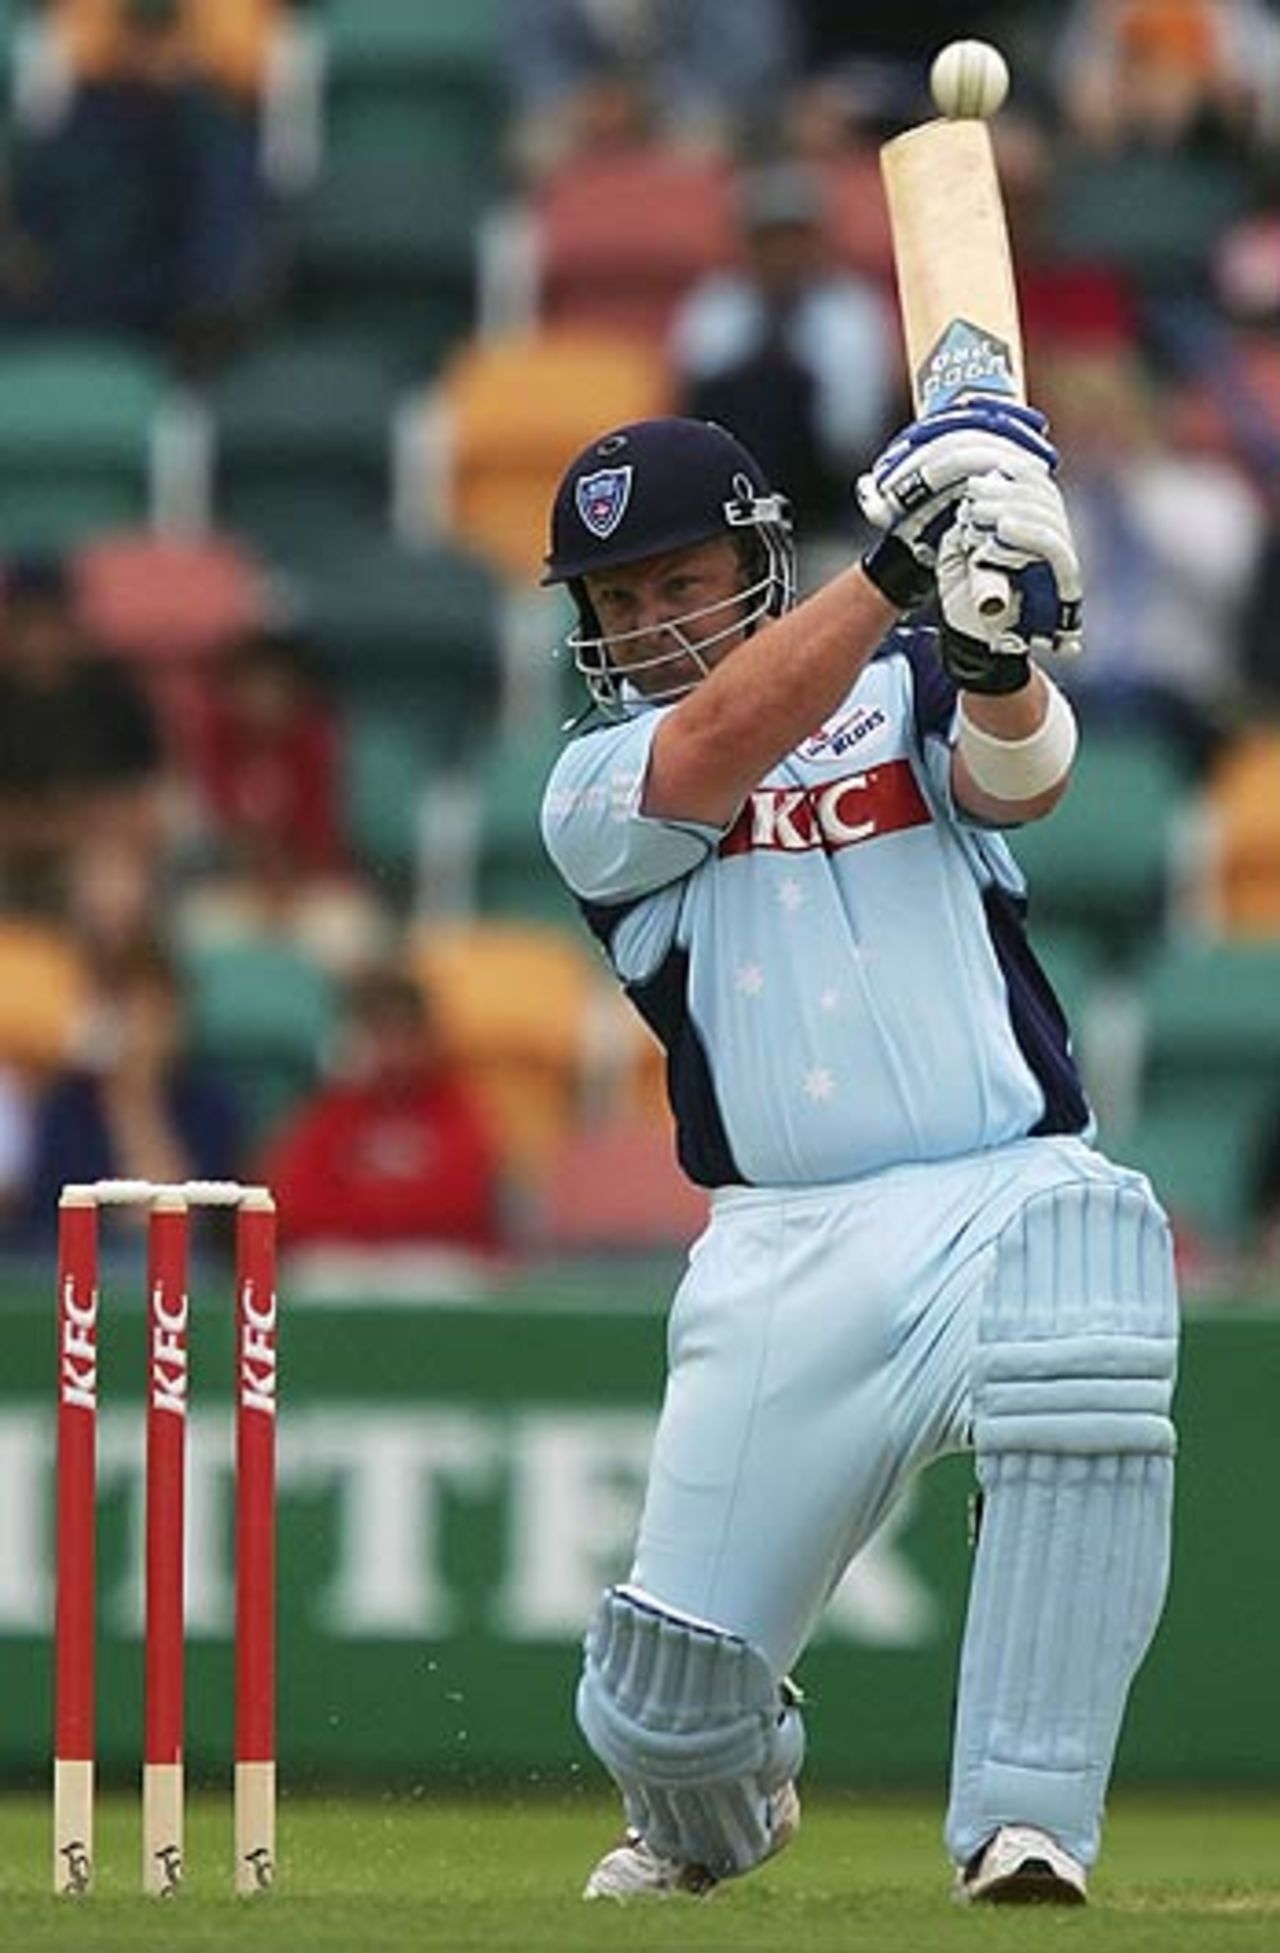 Daniel Smith contributed 28 to an opening stand of 90 for NSW, Tasmania v New South Wales, Australian Twenty20 Competition, Group B, Bellerive Oval, Hobart, January 10, 2005